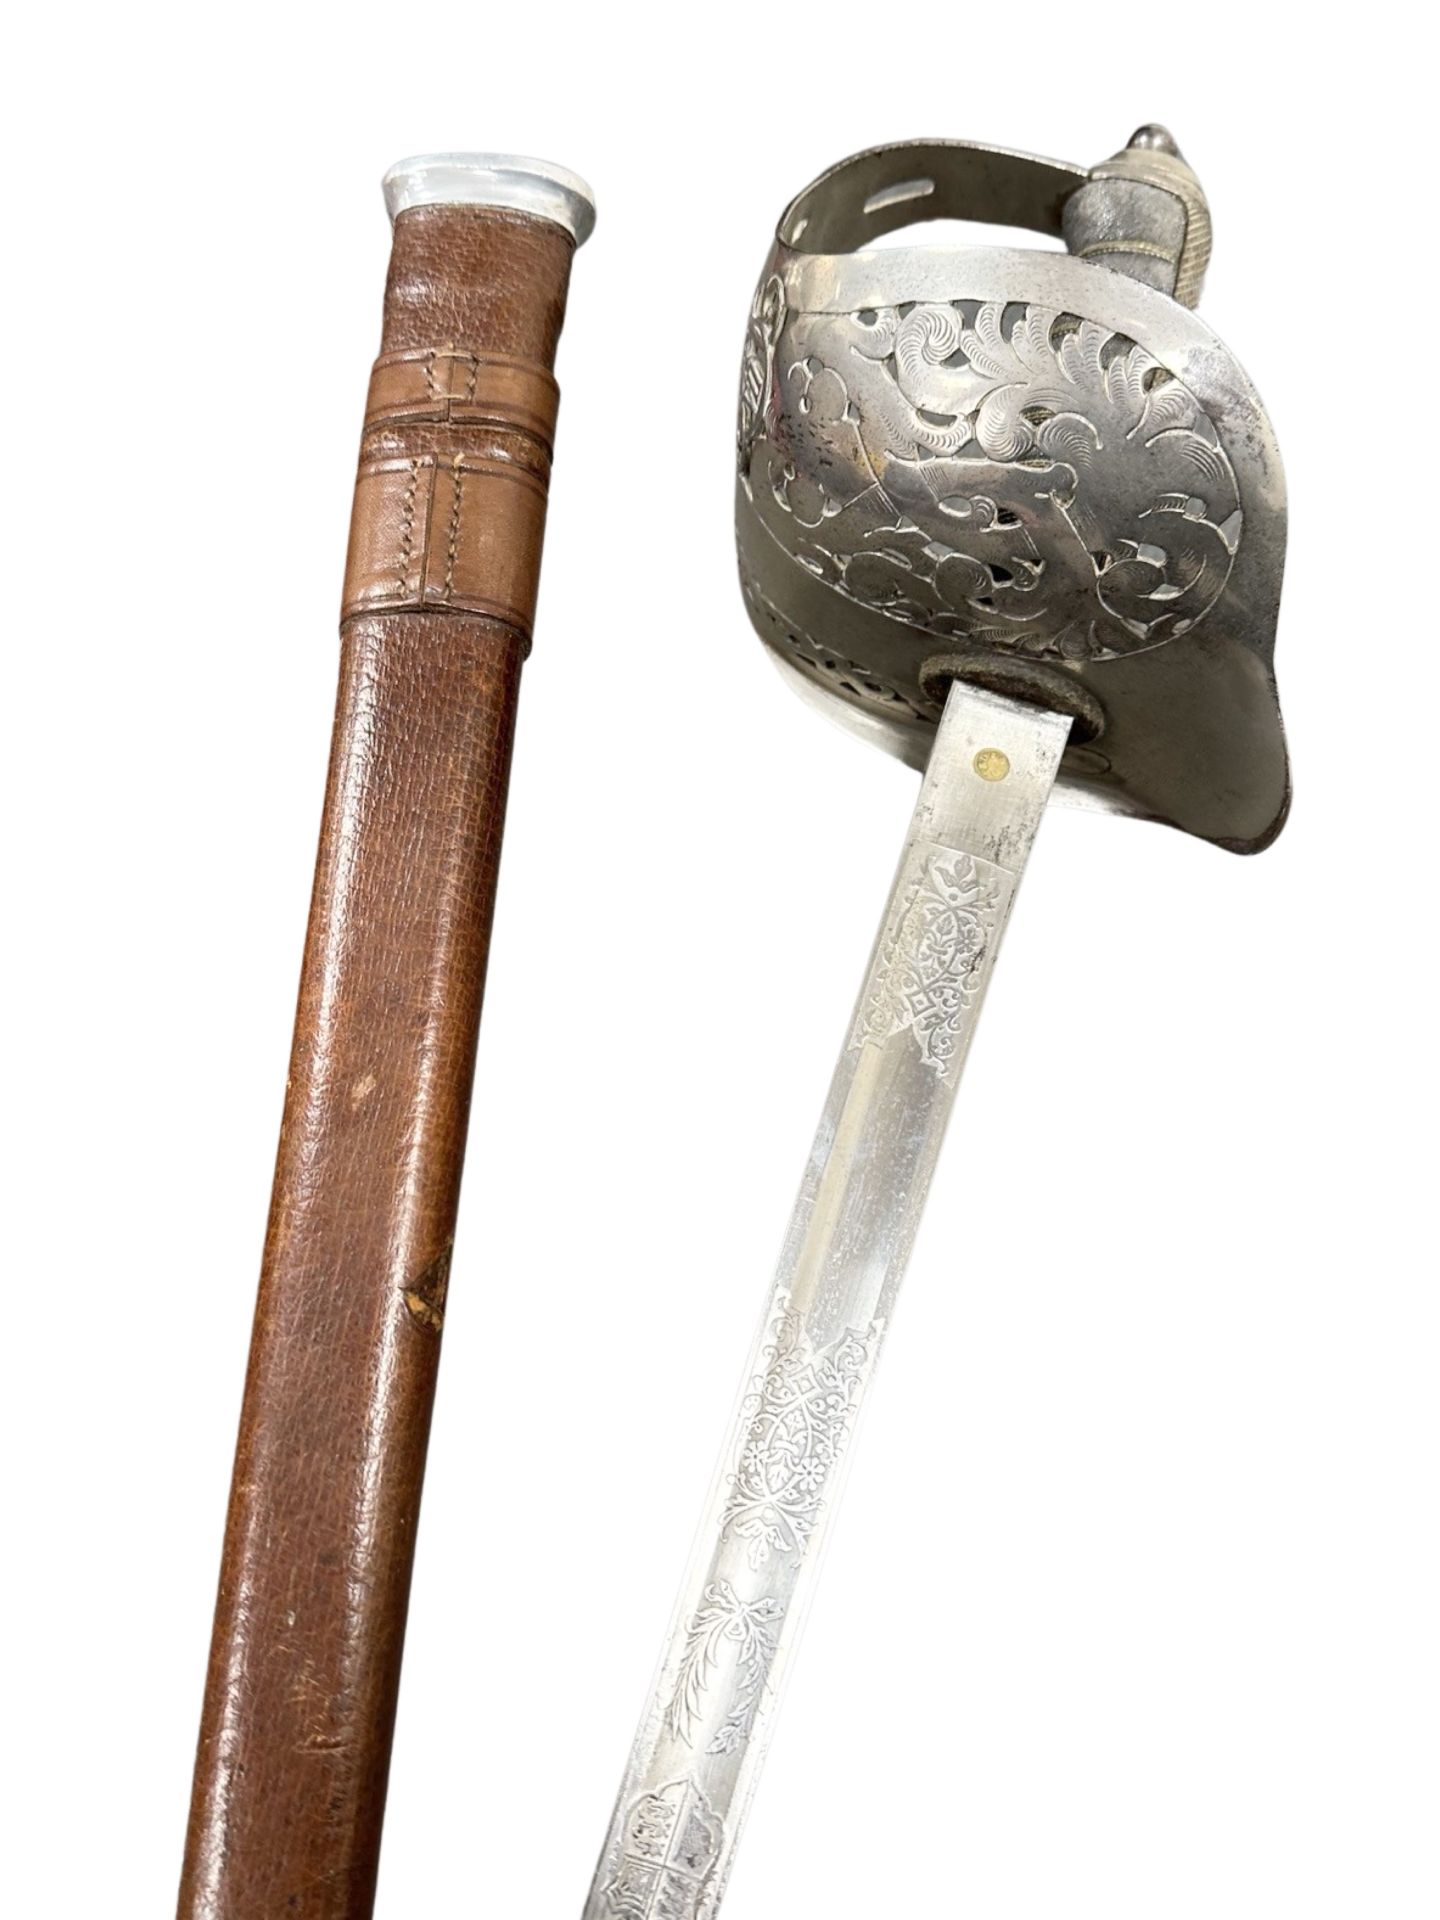 An Edward VII 1897 pattern infantry officer's sword, the nickel-plated hilt with Royal cipher,